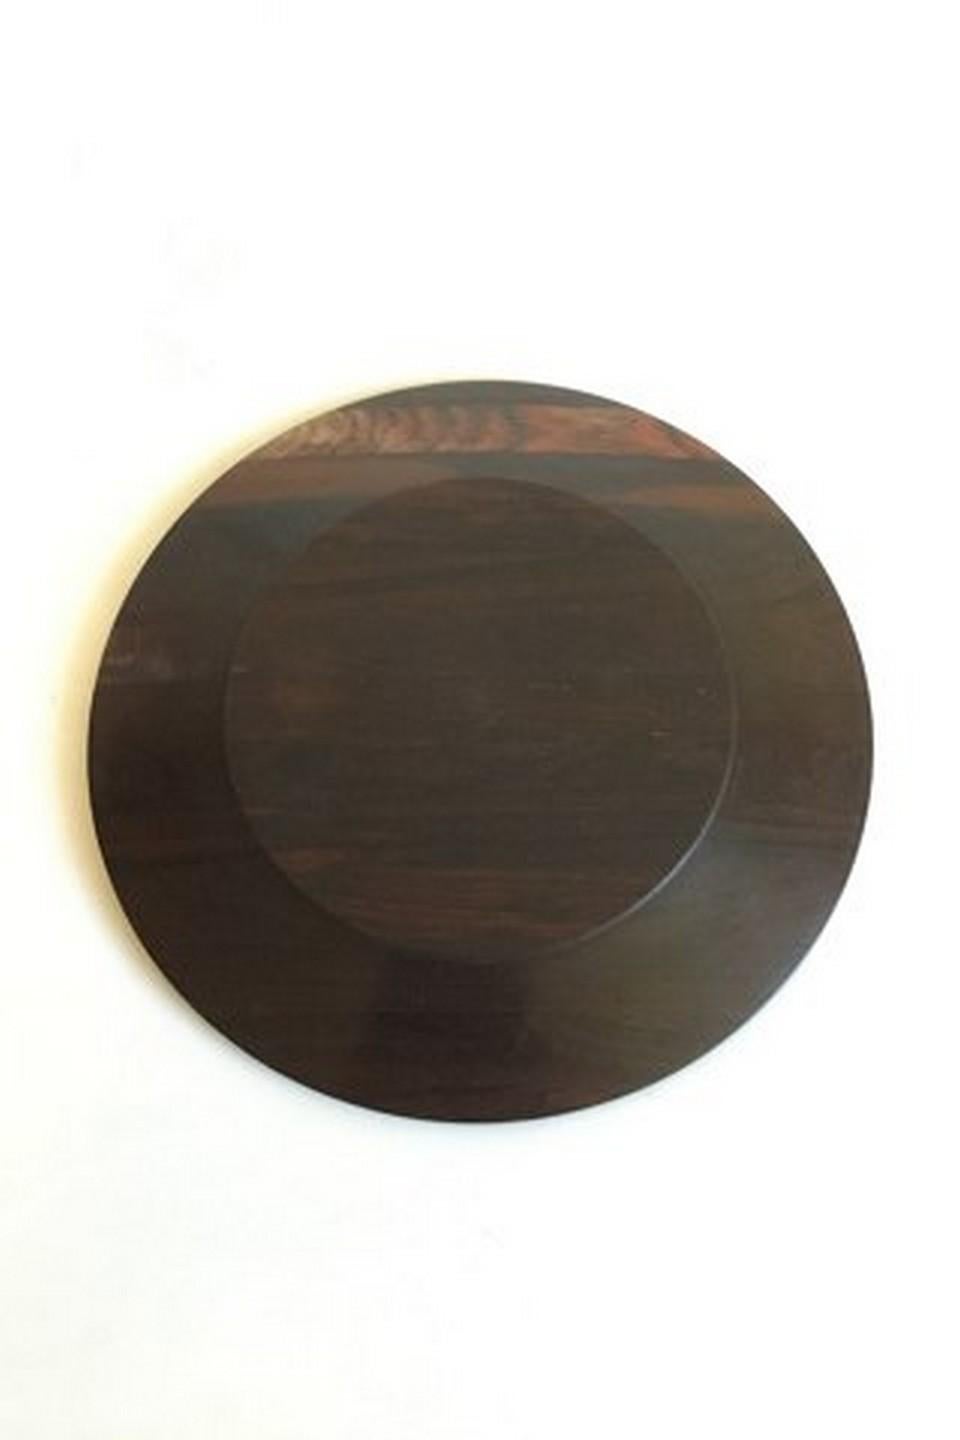 Hans Hansen rosewood plate with silver inlay. Measures 28 cm / 11 1/32 in.
Item no.: 360668.